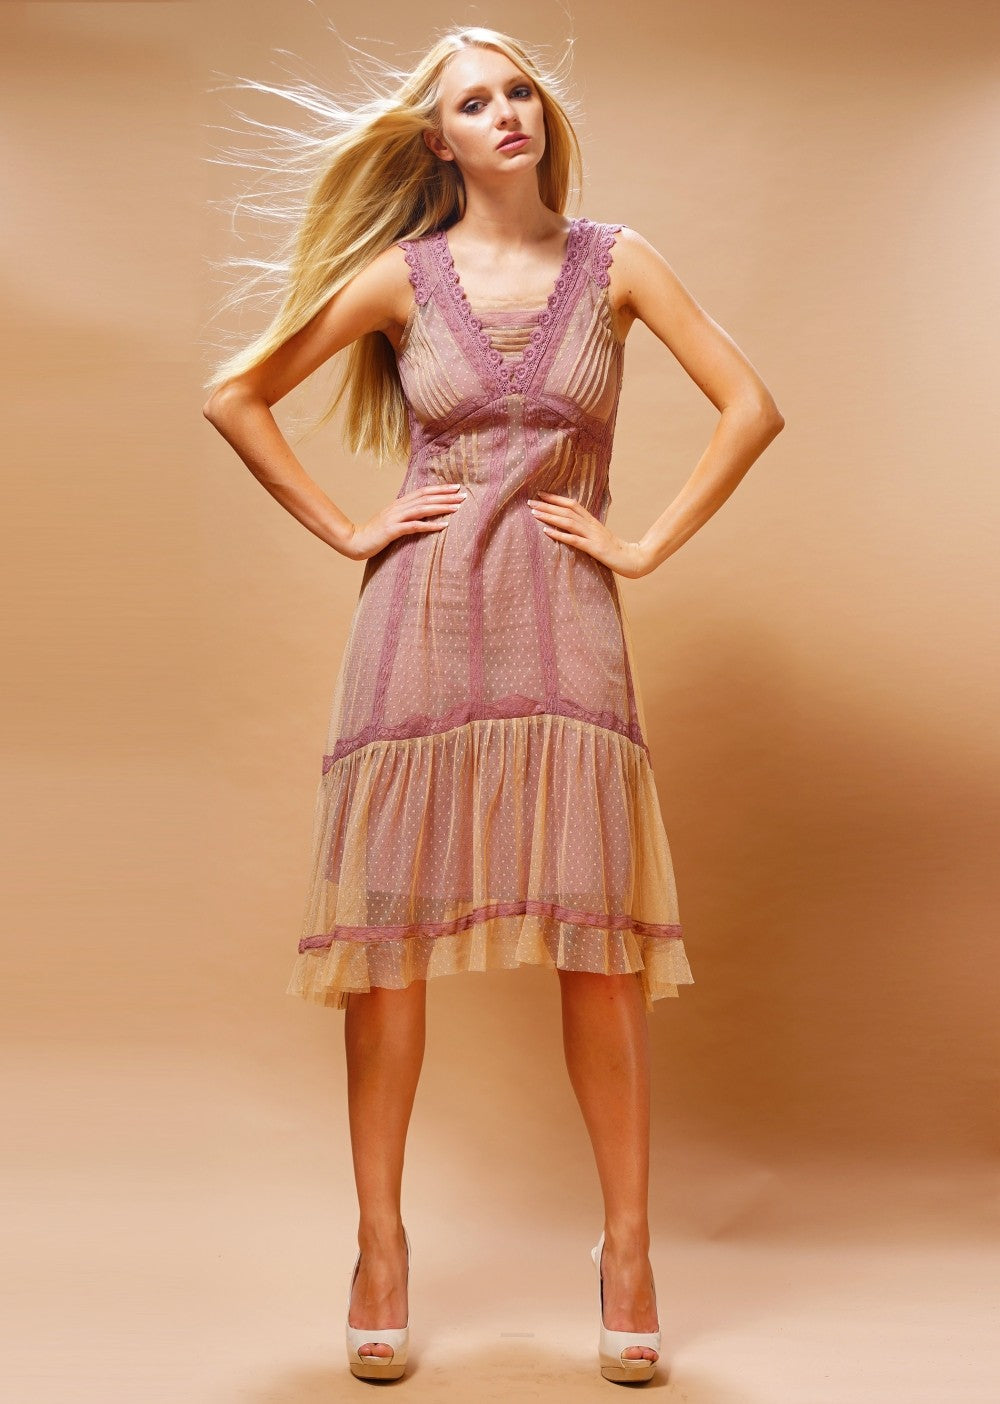 Bohemian Vintage Inspired Dress in Rose-Beige by Nataya - SOLD OUT